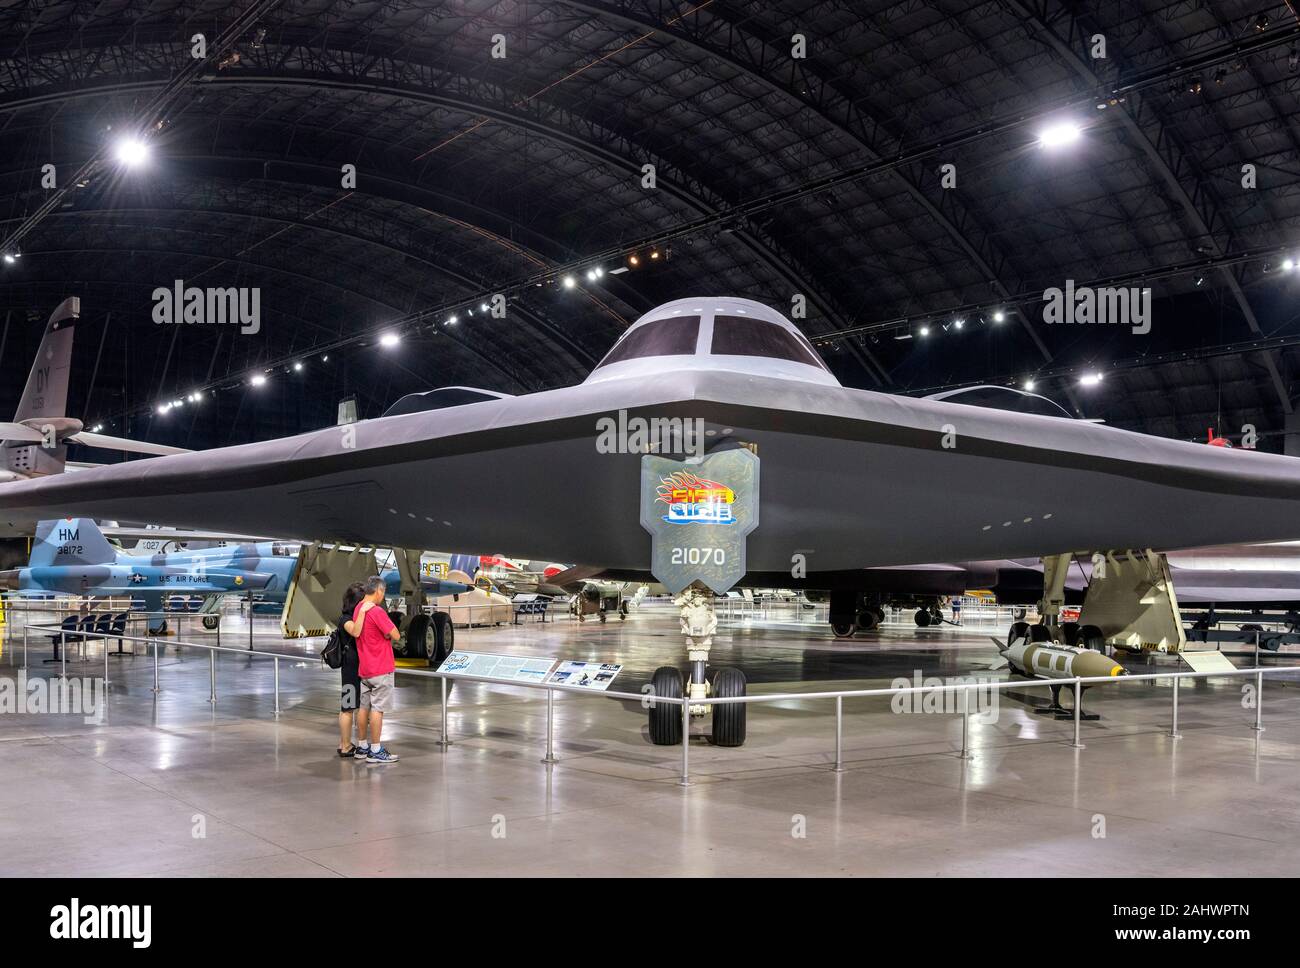 Visiteurs en face d'un Northrop Grumman B-2 Spirit stealth bomber, National Museum of the United States Air Force (anciennement l'United States Air Force Museum), Dayton, Ohio, USA. Banque D'Images